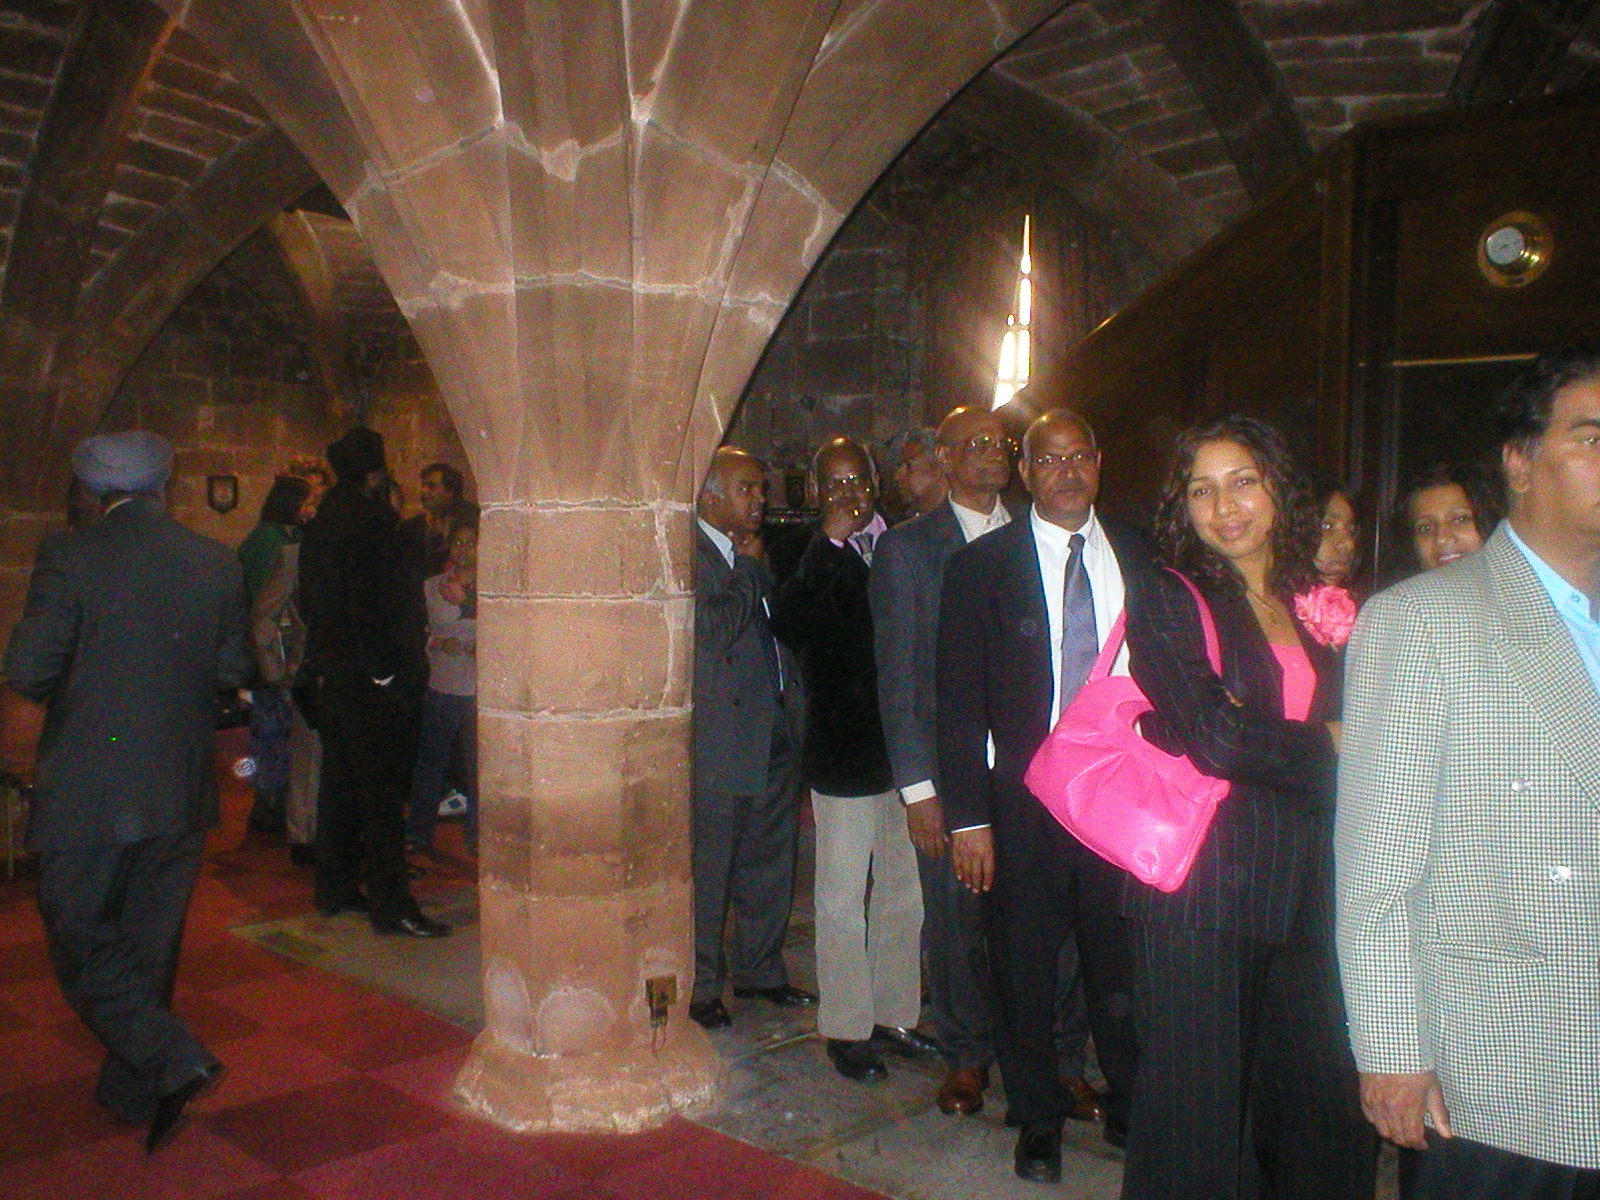 Conference Participants enjoying the excellent architectural features whilst waiting to be served